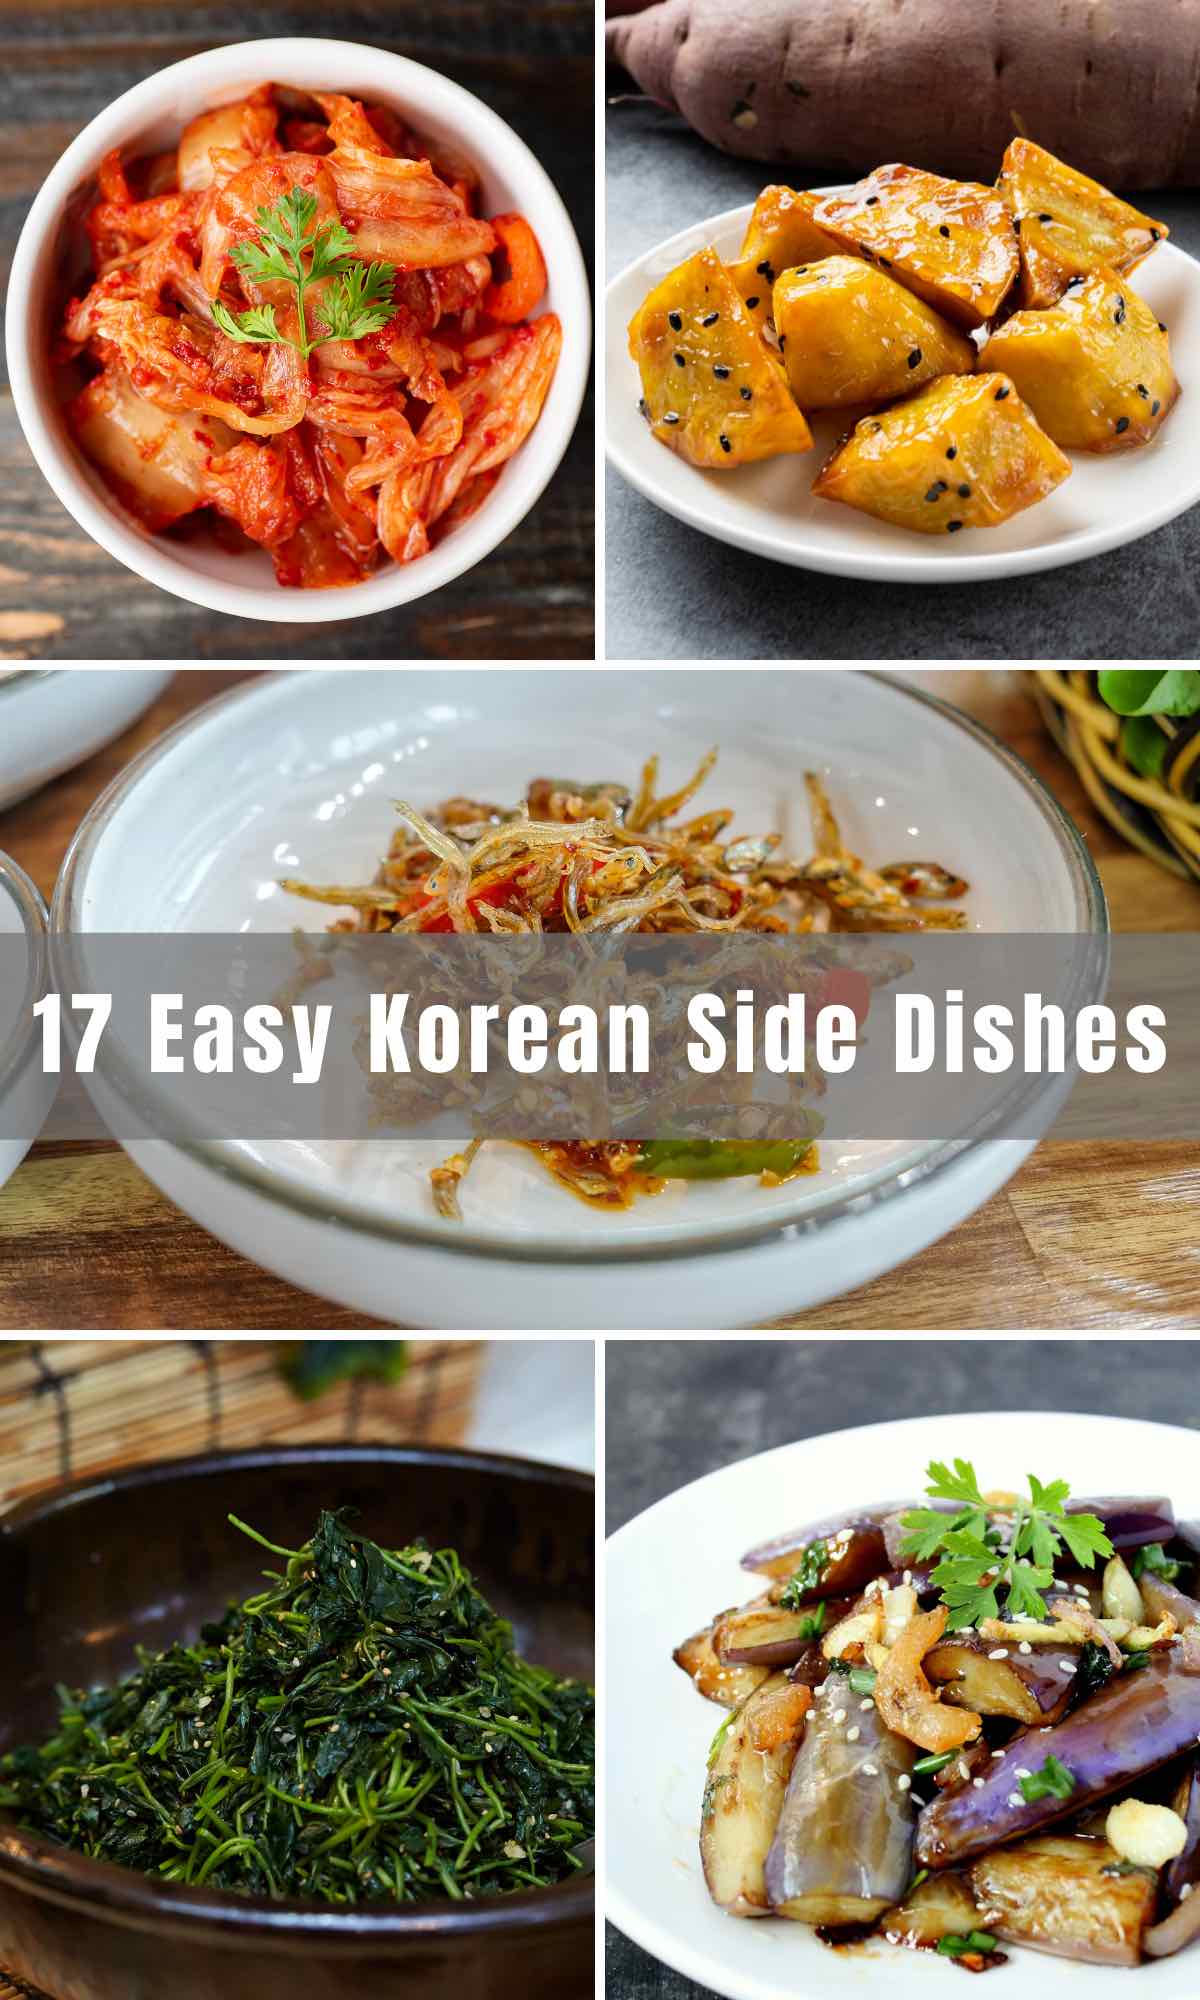 We've collected 17 Easy Korean Side Dishes that you can serve when you want to have Korean food. From vegetable banchan to Kimchi and candied sweet potatoes, we've listed all the popular Korean side dish recipes below.